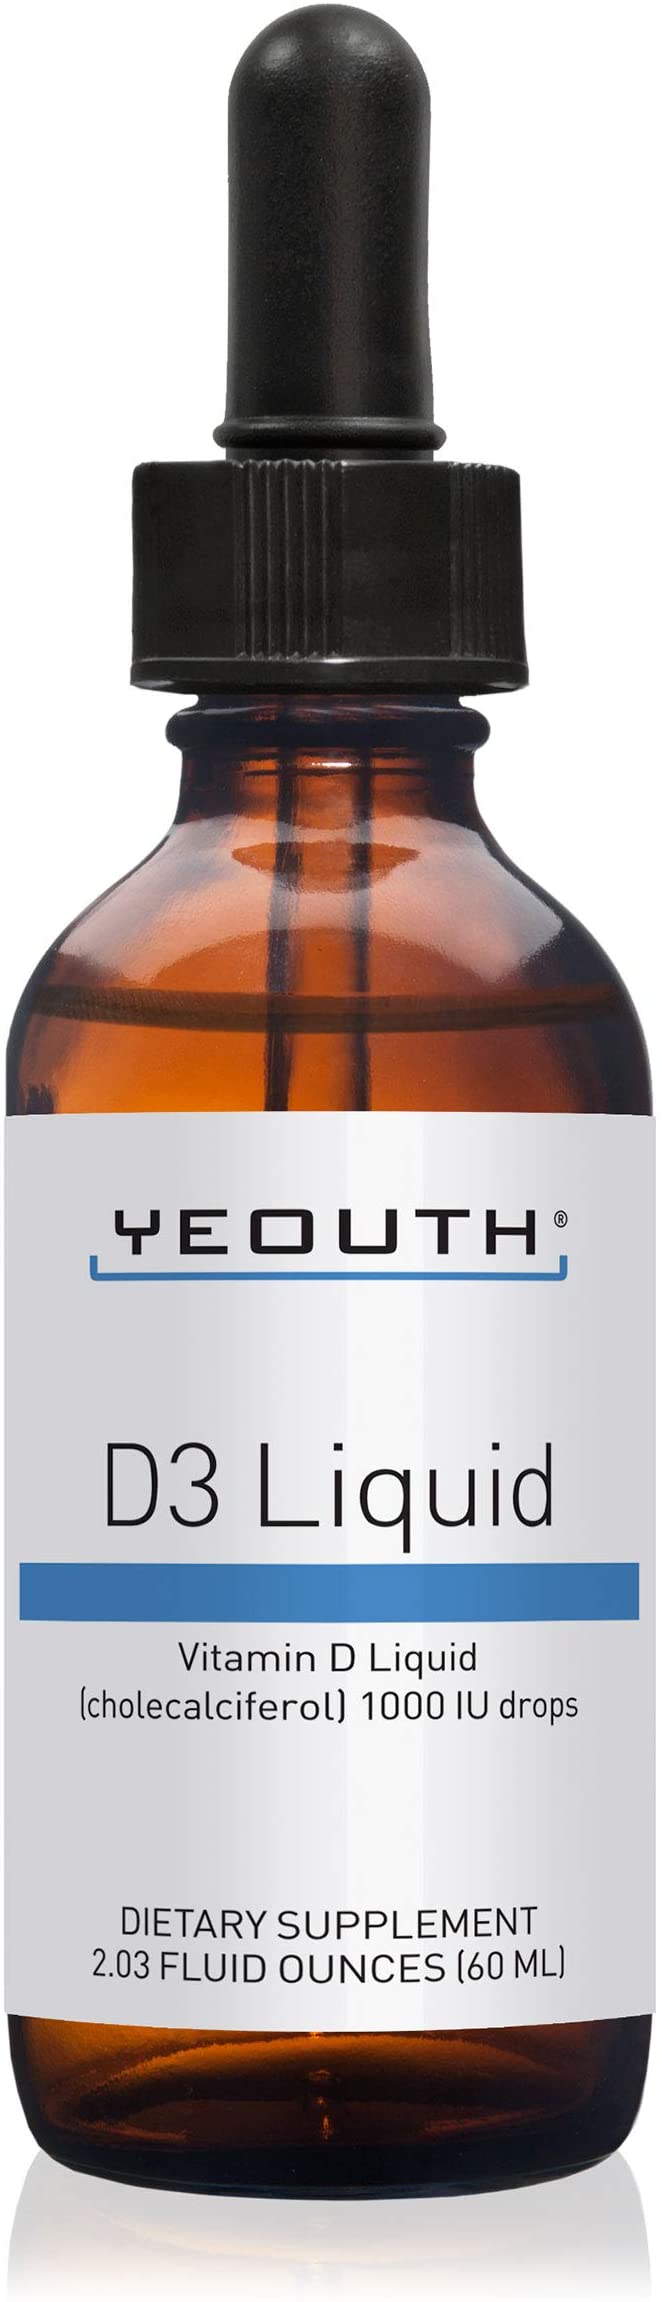 YEOUTH Vitamin D3 Liquid Drops 1000 IU Per Drop, Best Vitamin D Supplement for Strong Bones & Joints, Healthy Immune System, Combat Hair Loss, Boost Energy - 60 ml